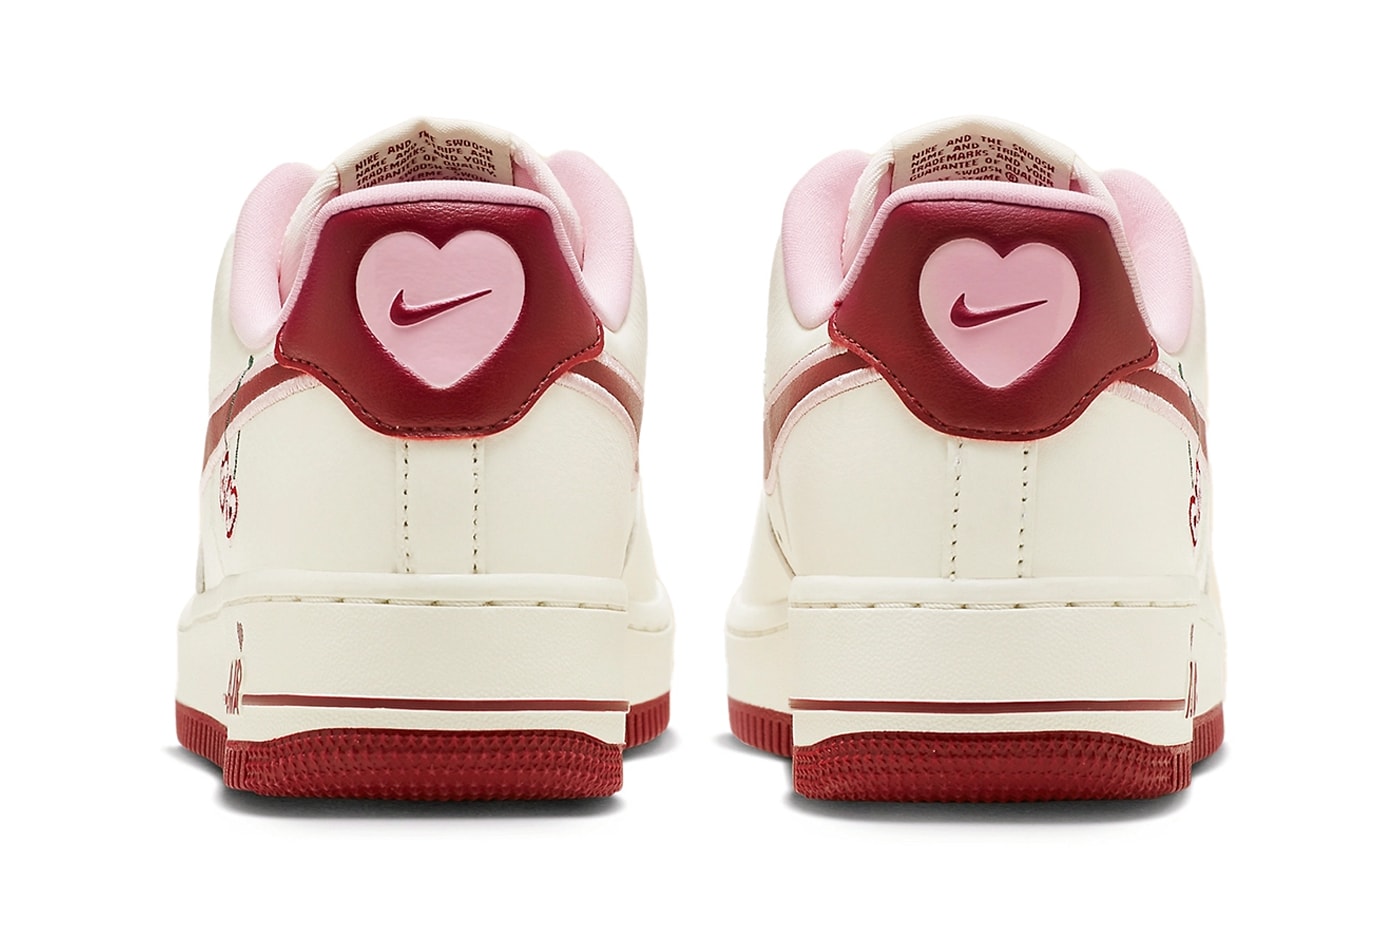 Nike Air Force 1 Low "Valentine's Day" Release Hypebeast